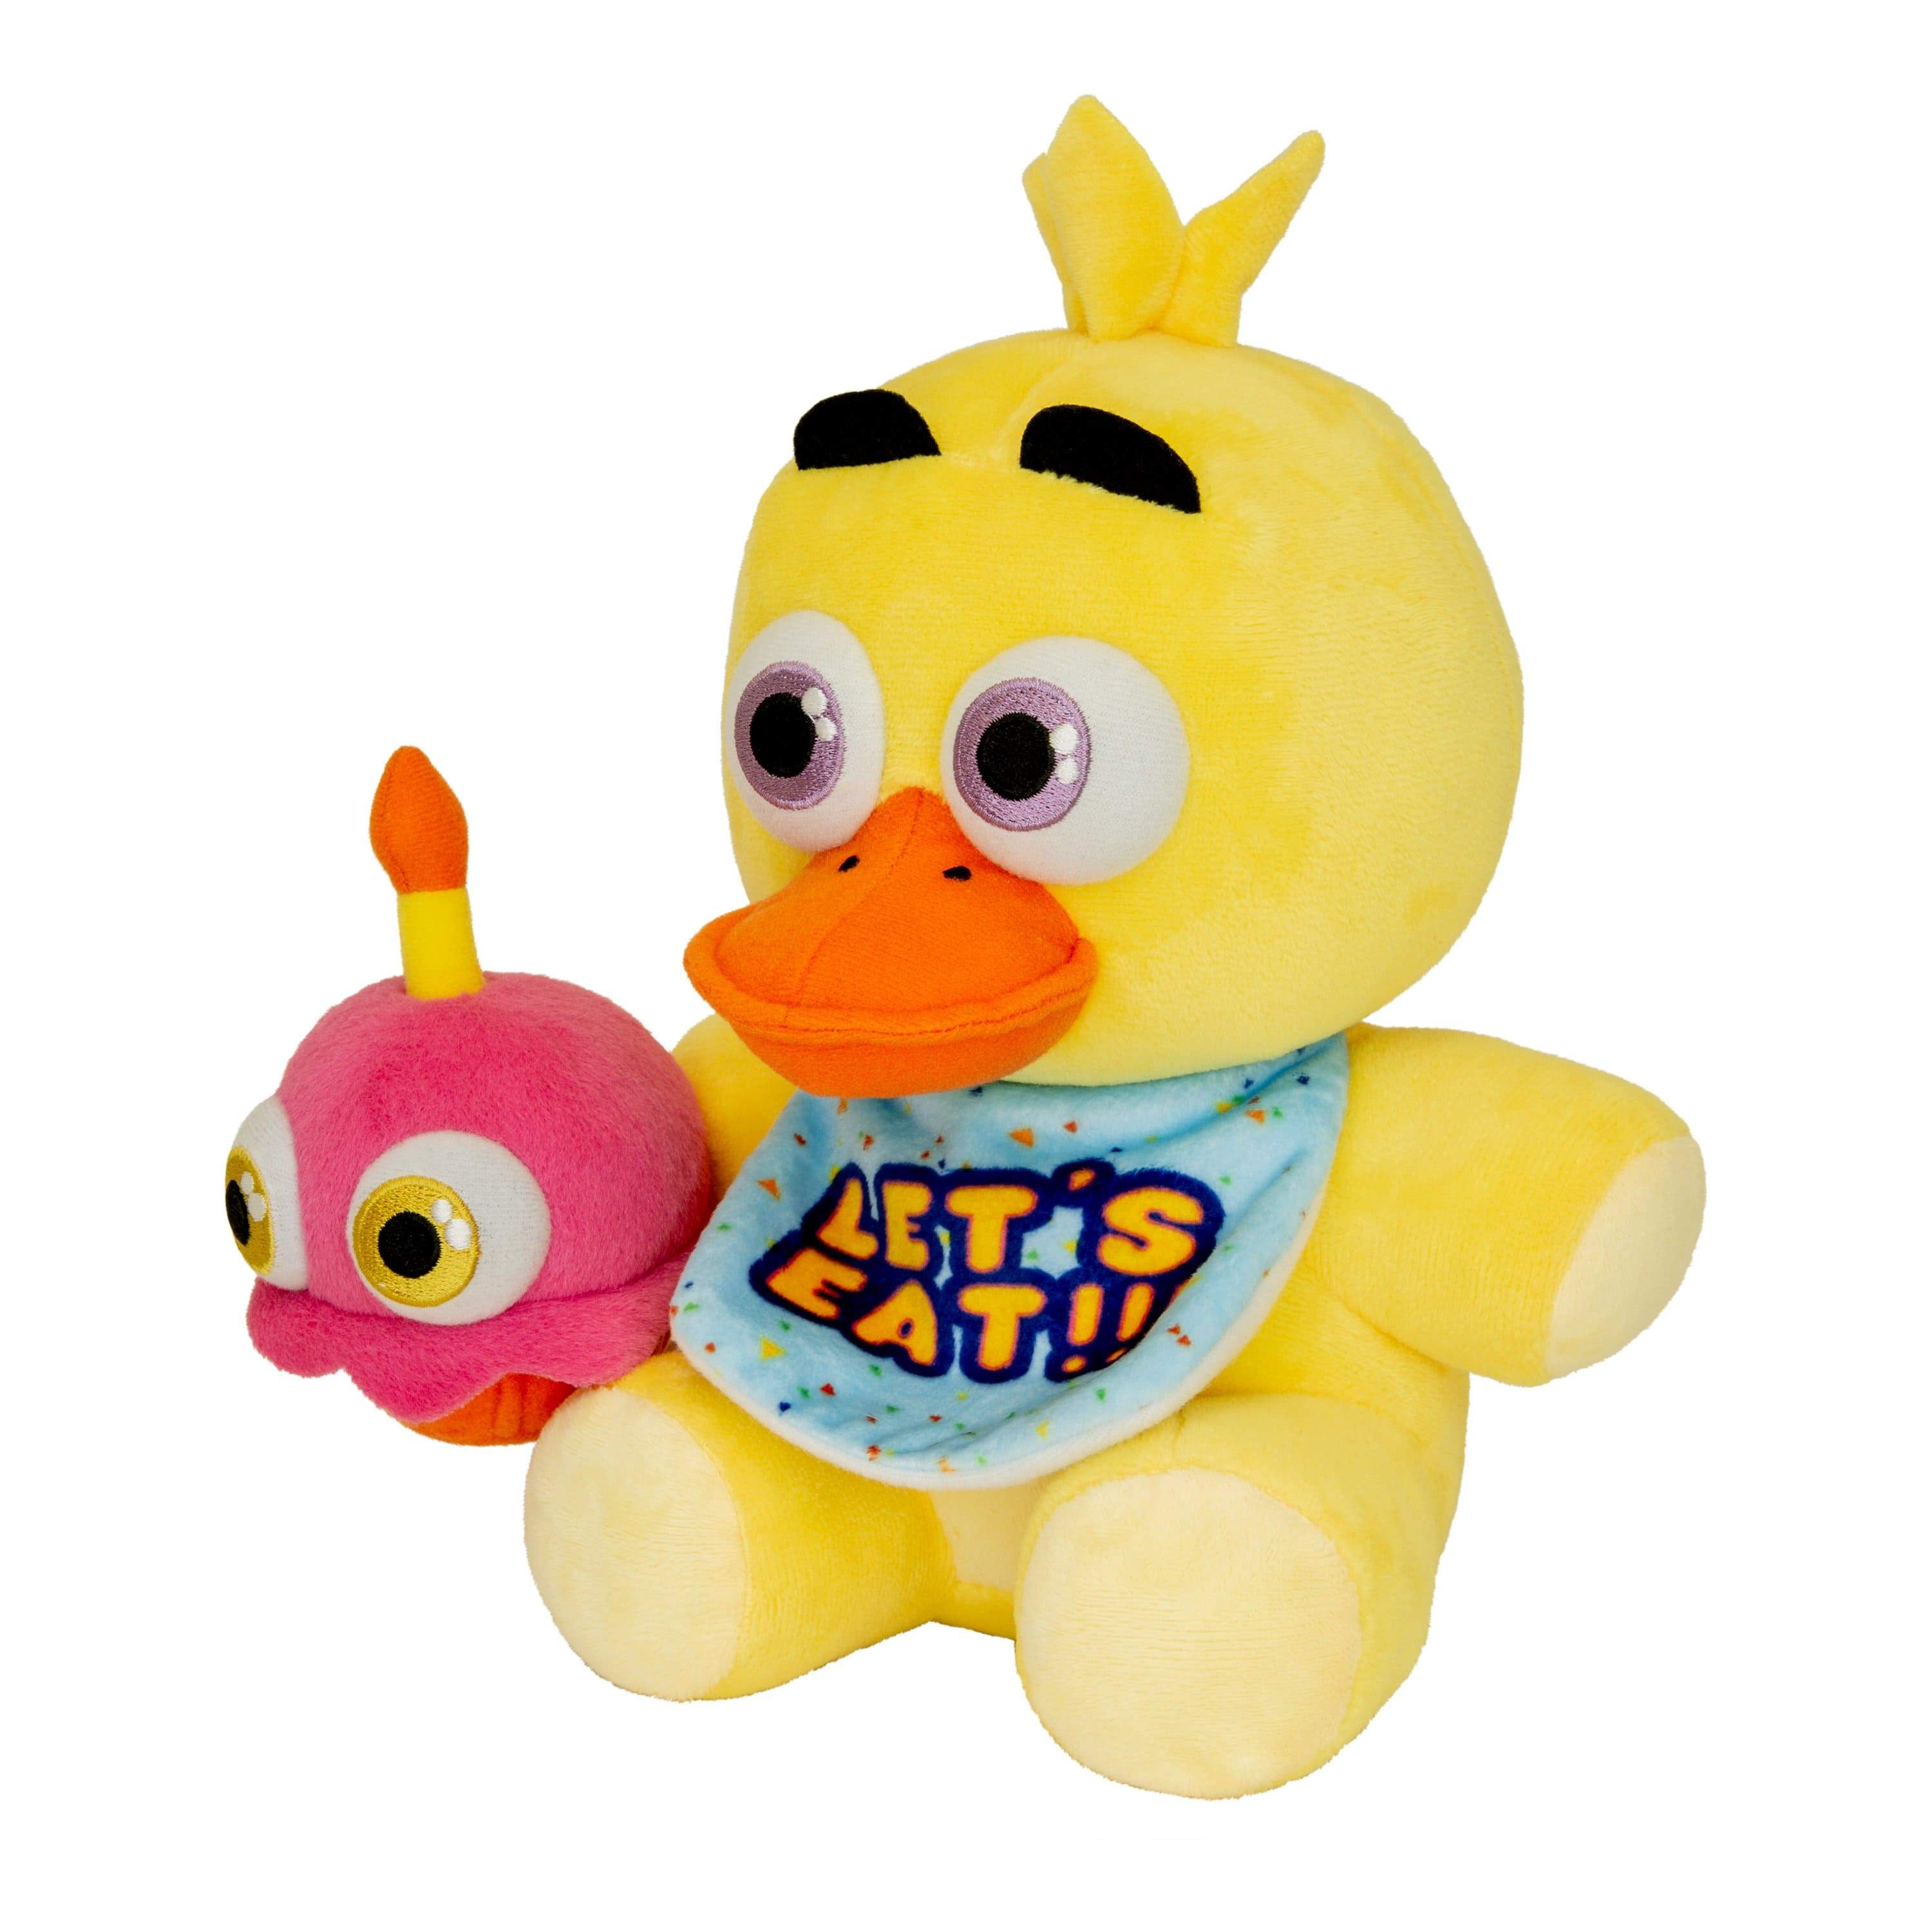 Five Nights At Freddy's 12 Plush: Chica